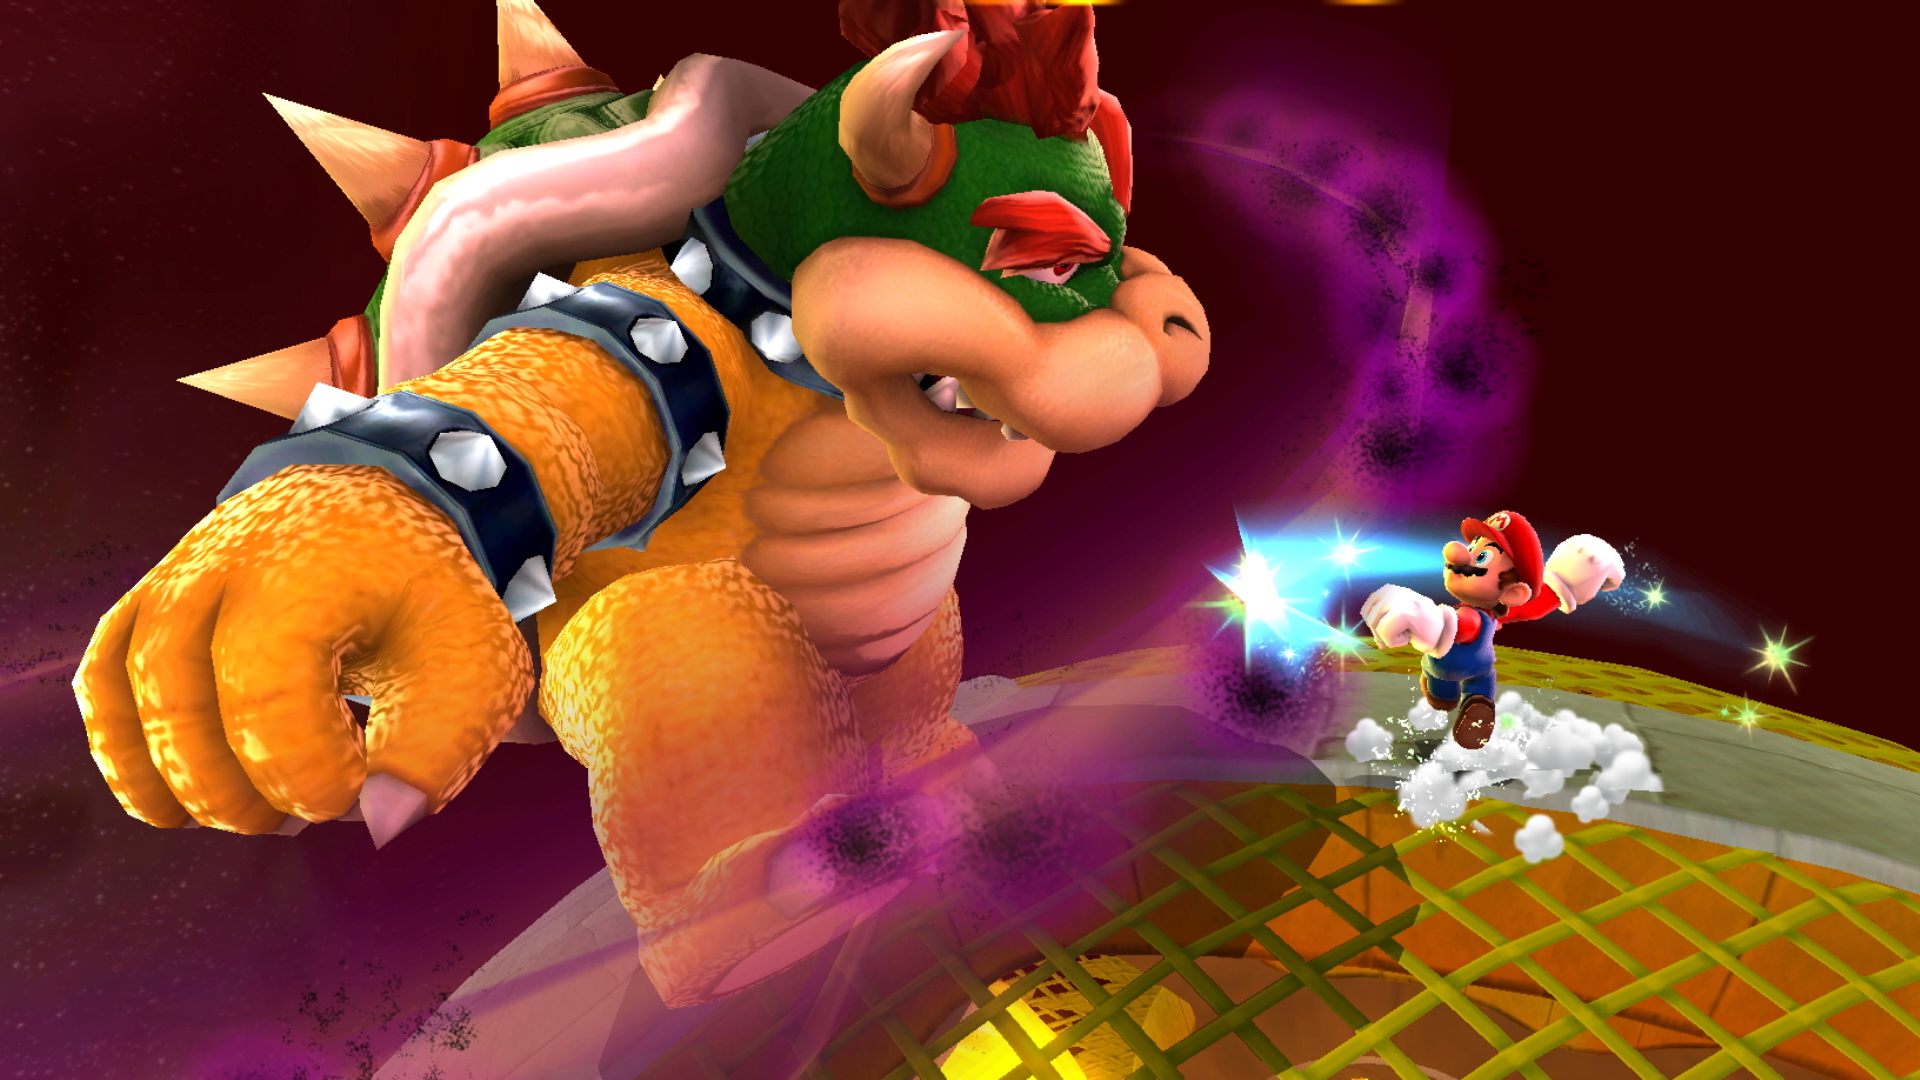 Super Mario Galaxy's Spin Won't Be As Annoying In Super Mario 3D All Stars